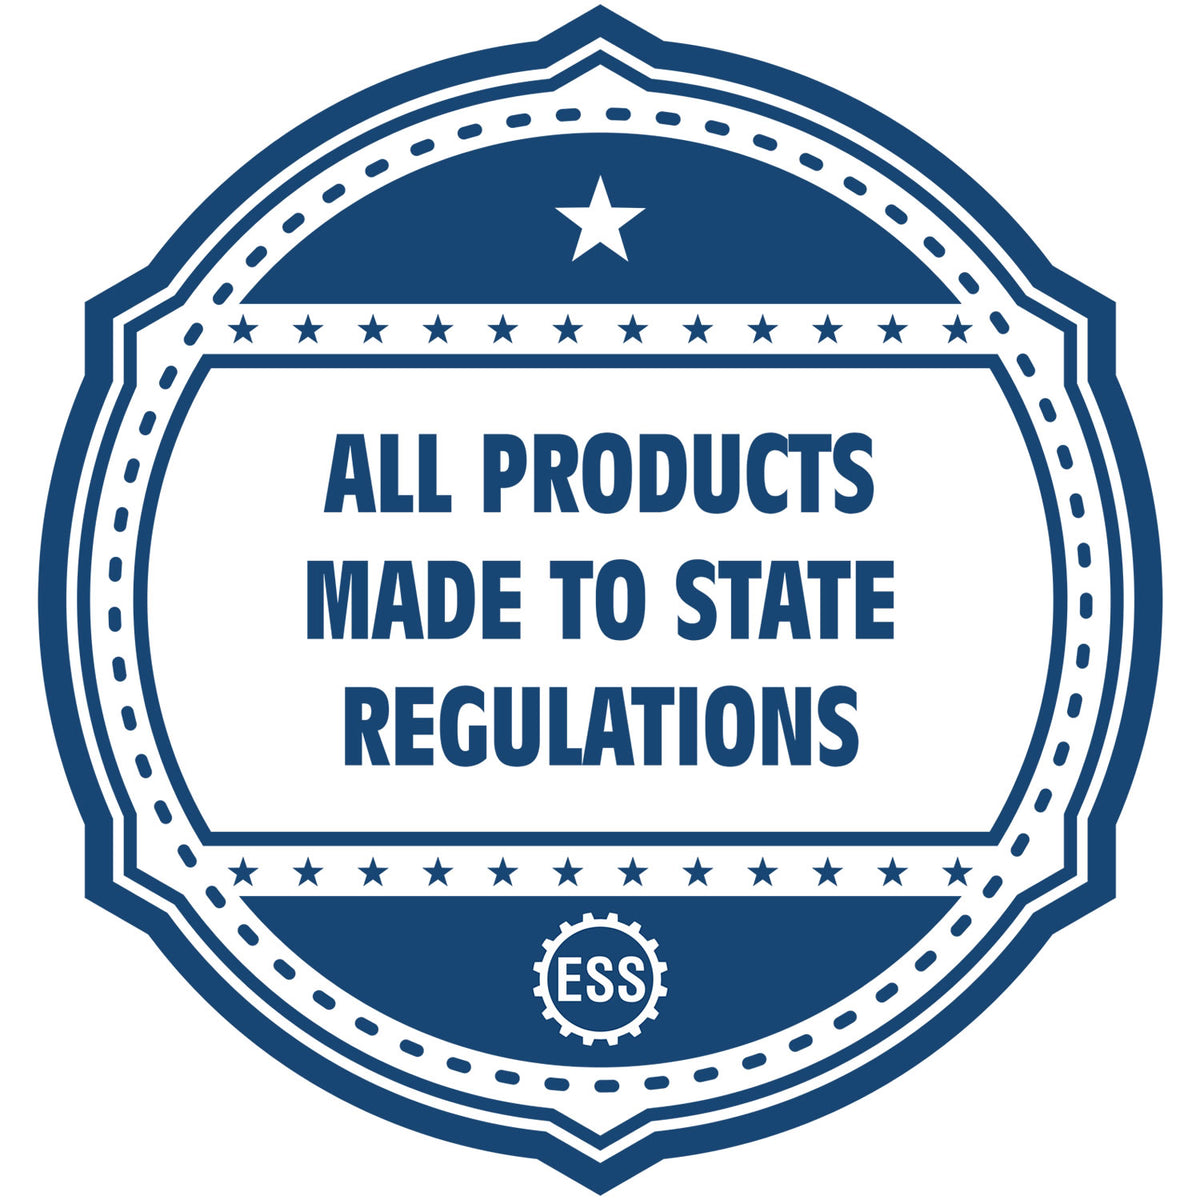 An icon or badge element for the State of New Mexico Long Reach Architectural Embossing Seal showing that this product is made in compliance with state regulations.